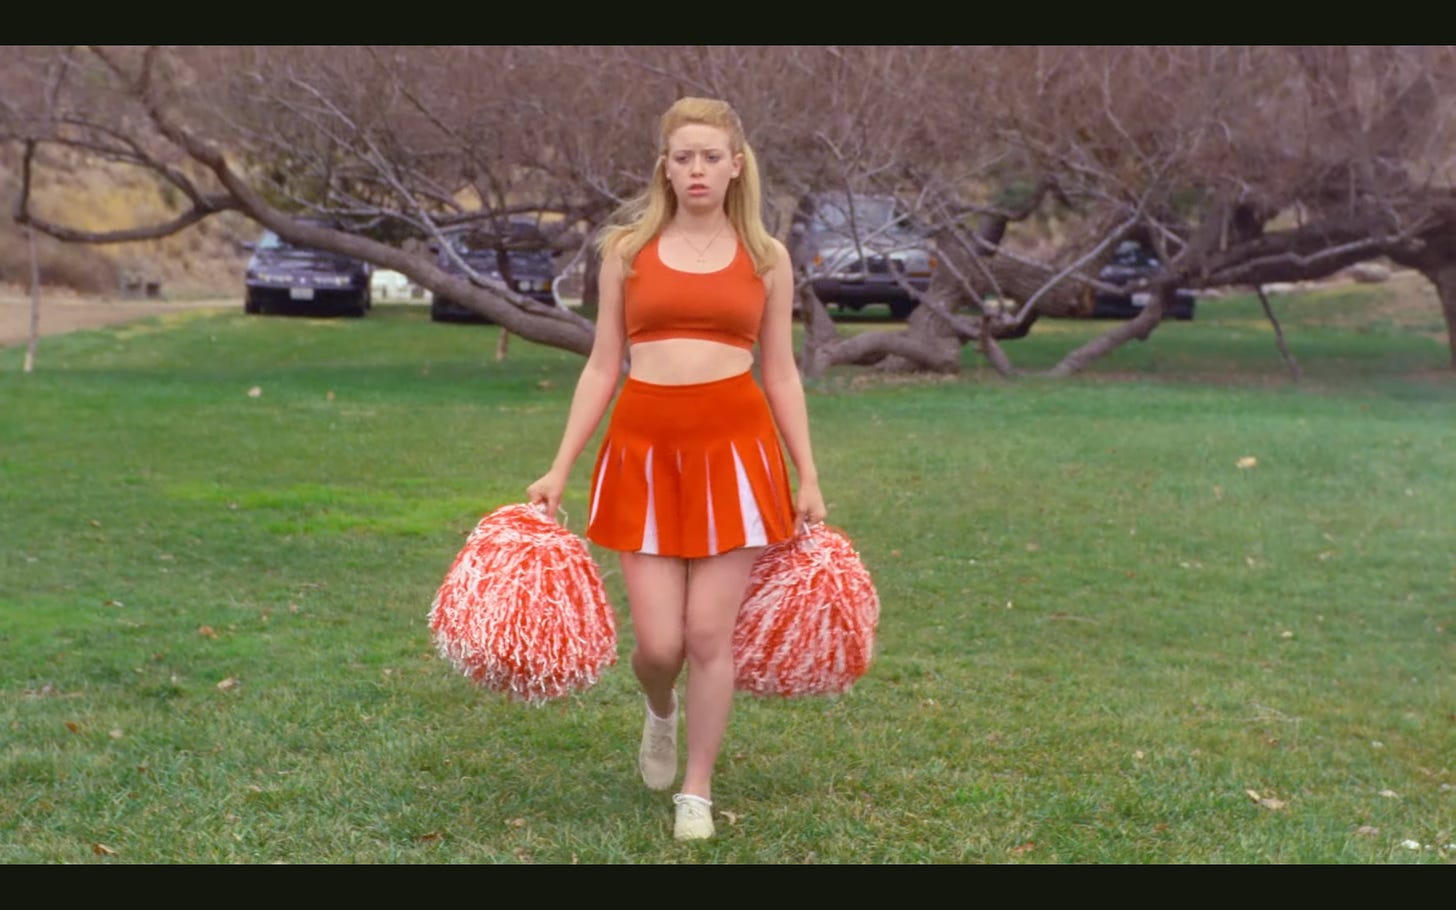 A young Natasha Lyonne in her role as the main character of "But I'm a Cheerleader" walking in cheerleading costume with pom poms over grass, cars behind a tree in the background, she looks sad and determined